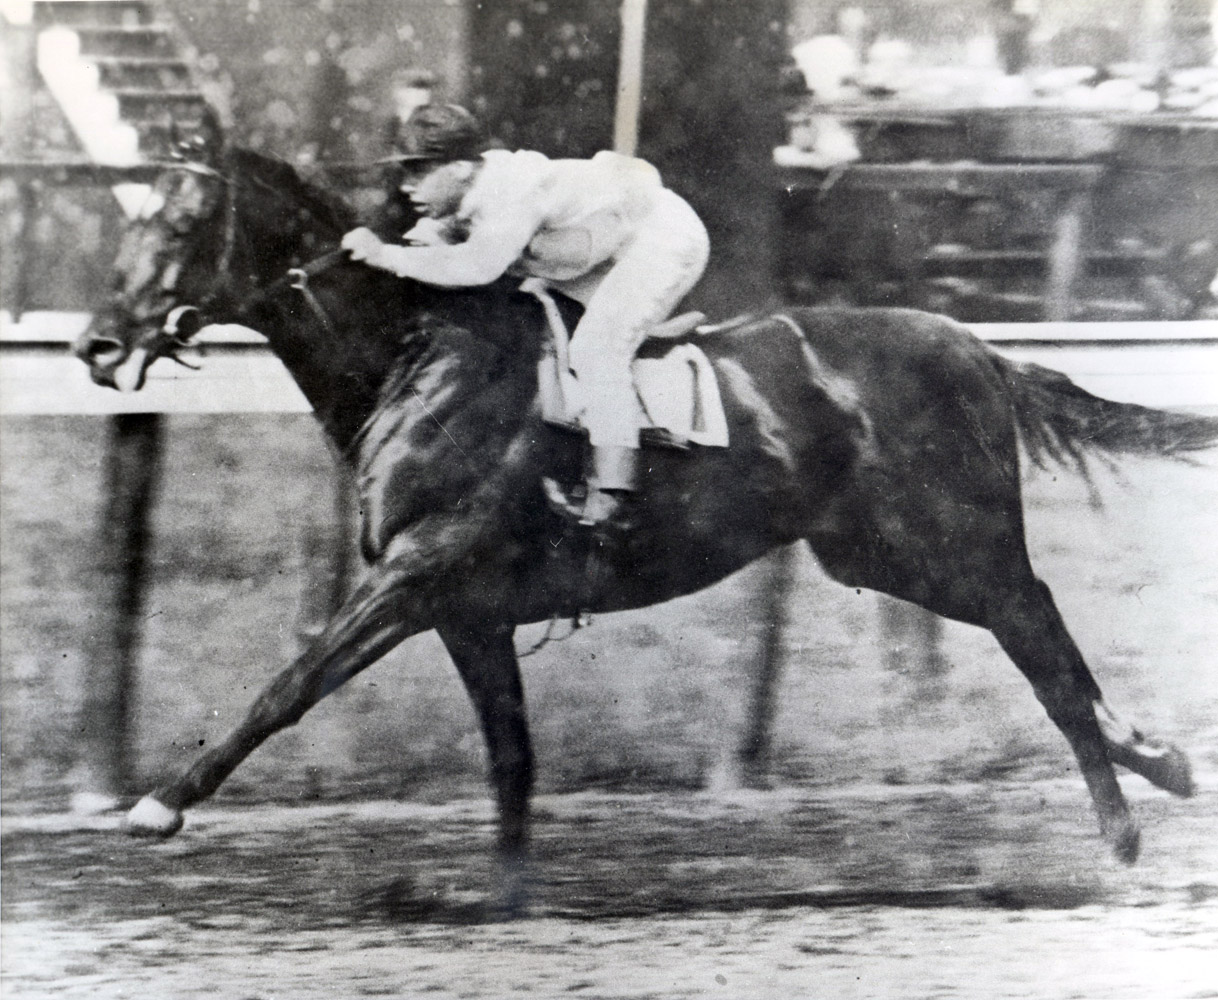 Whisk Broom II (Joe Notter up) racing in the 1913 Brooklyn Handicap at Belmont, his second race and second win in America (Museum Collection)